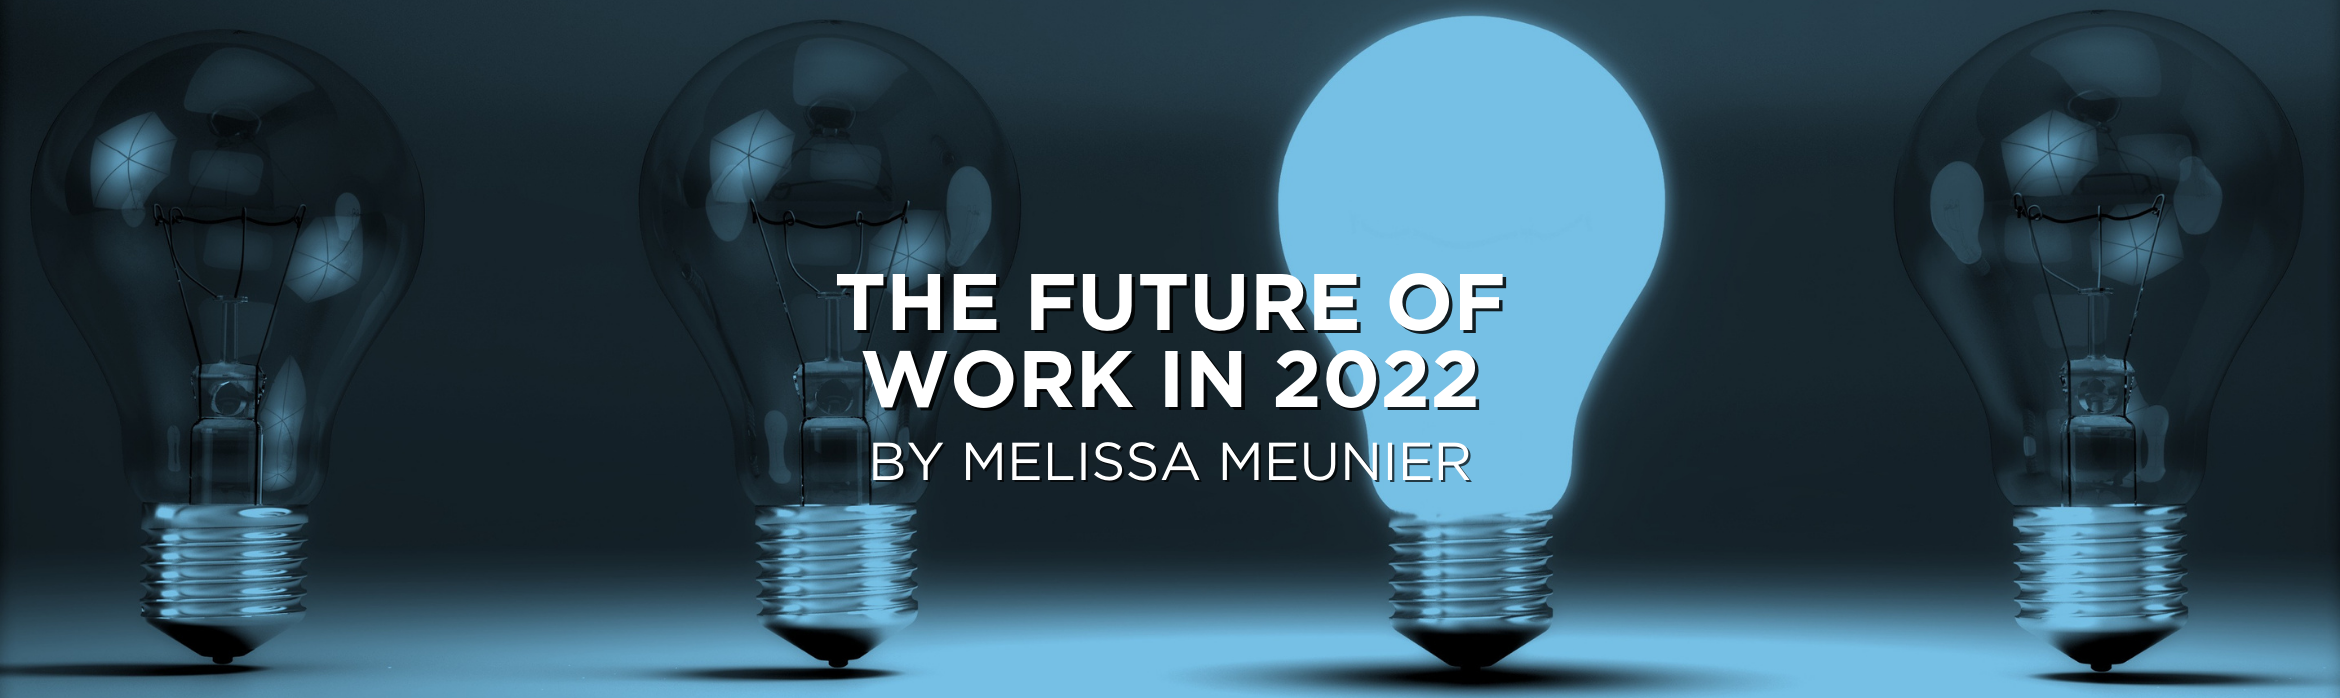 The Future of Work in 2022